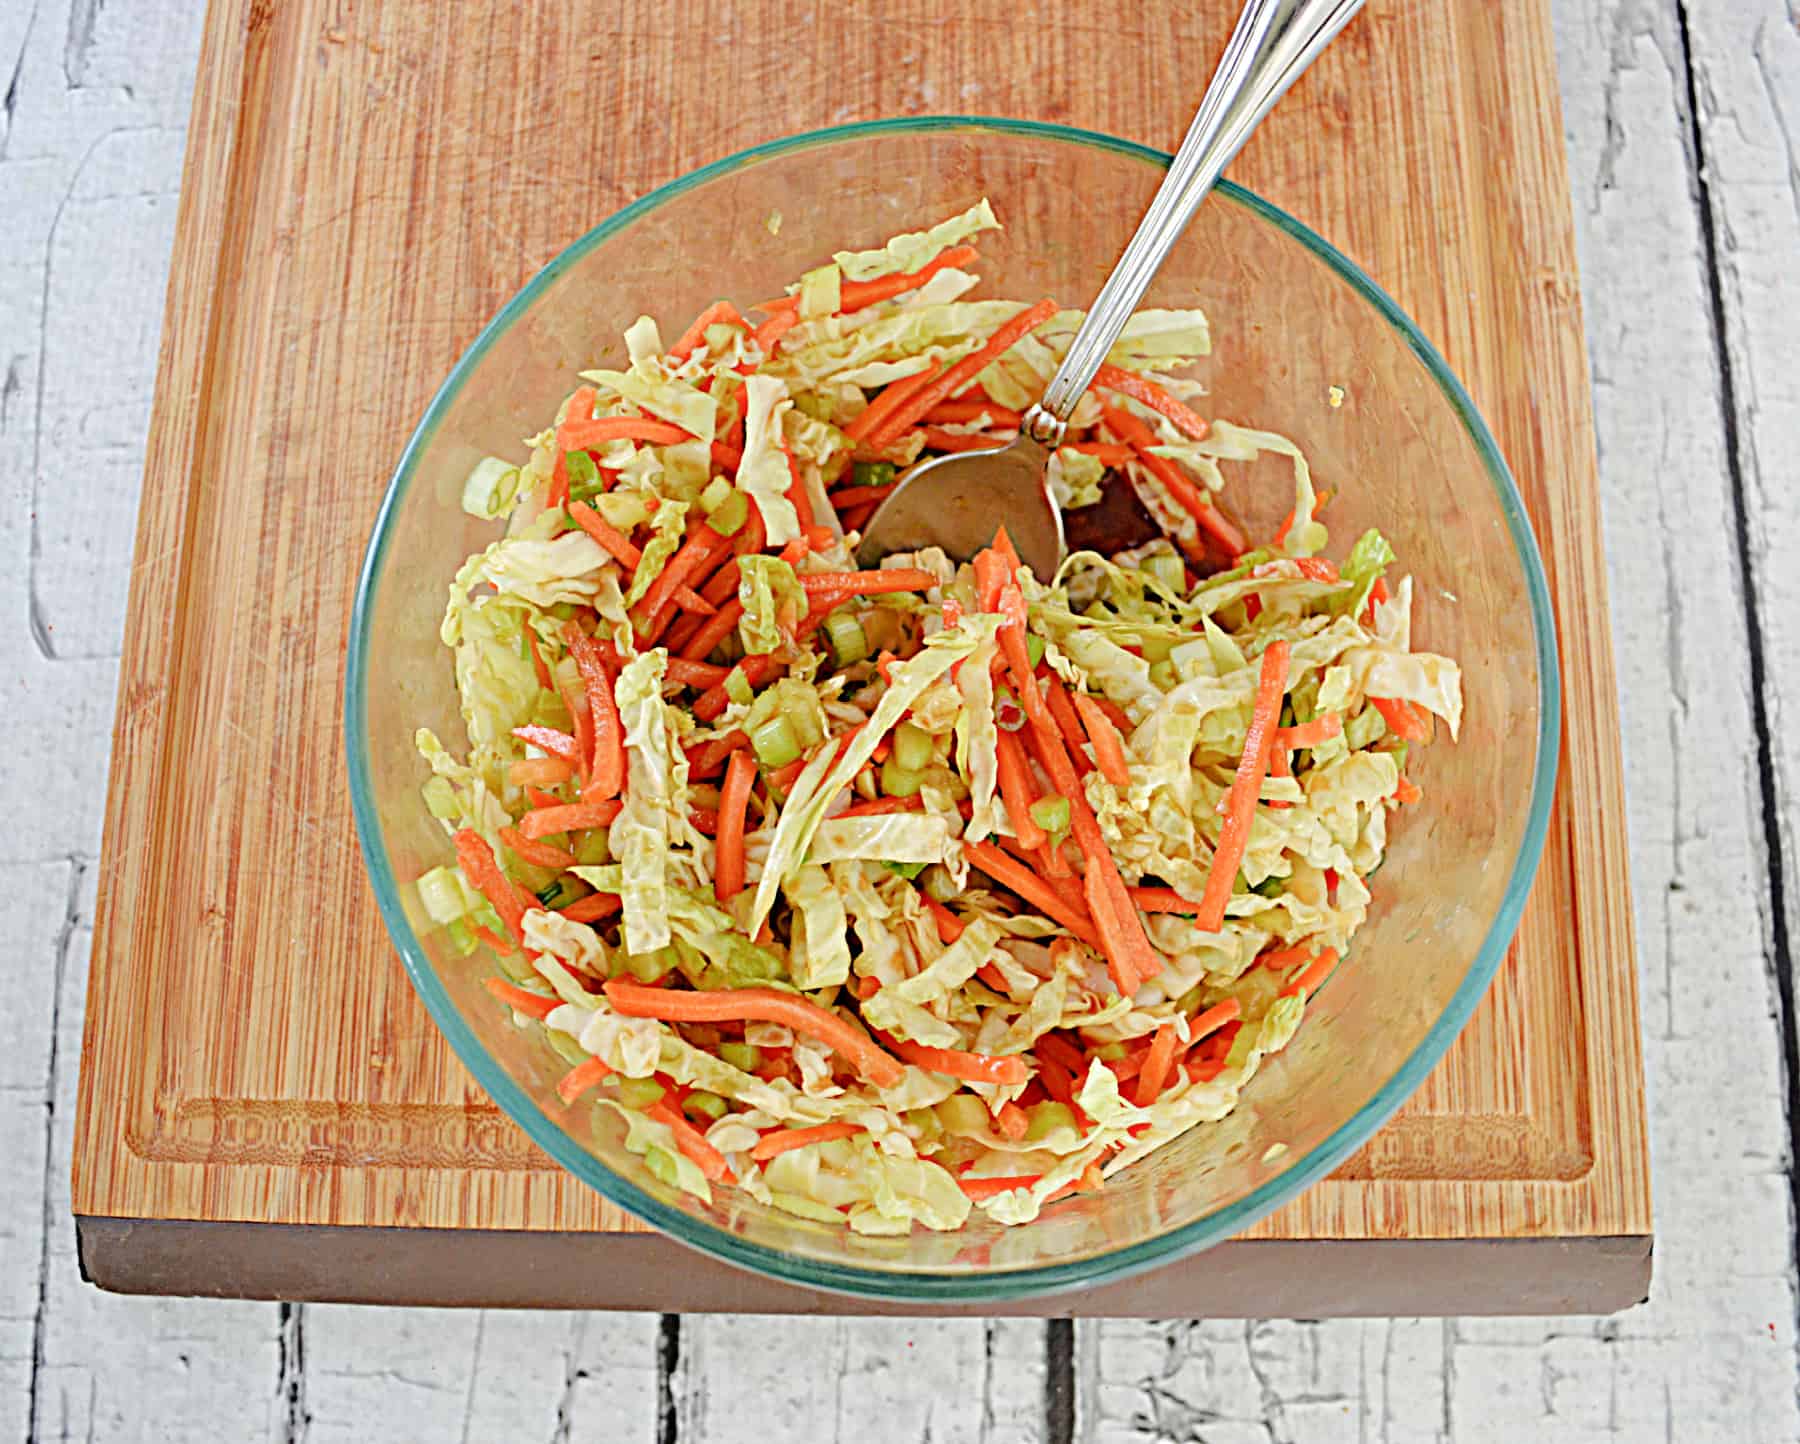 A bowl of cabbage and carrots.